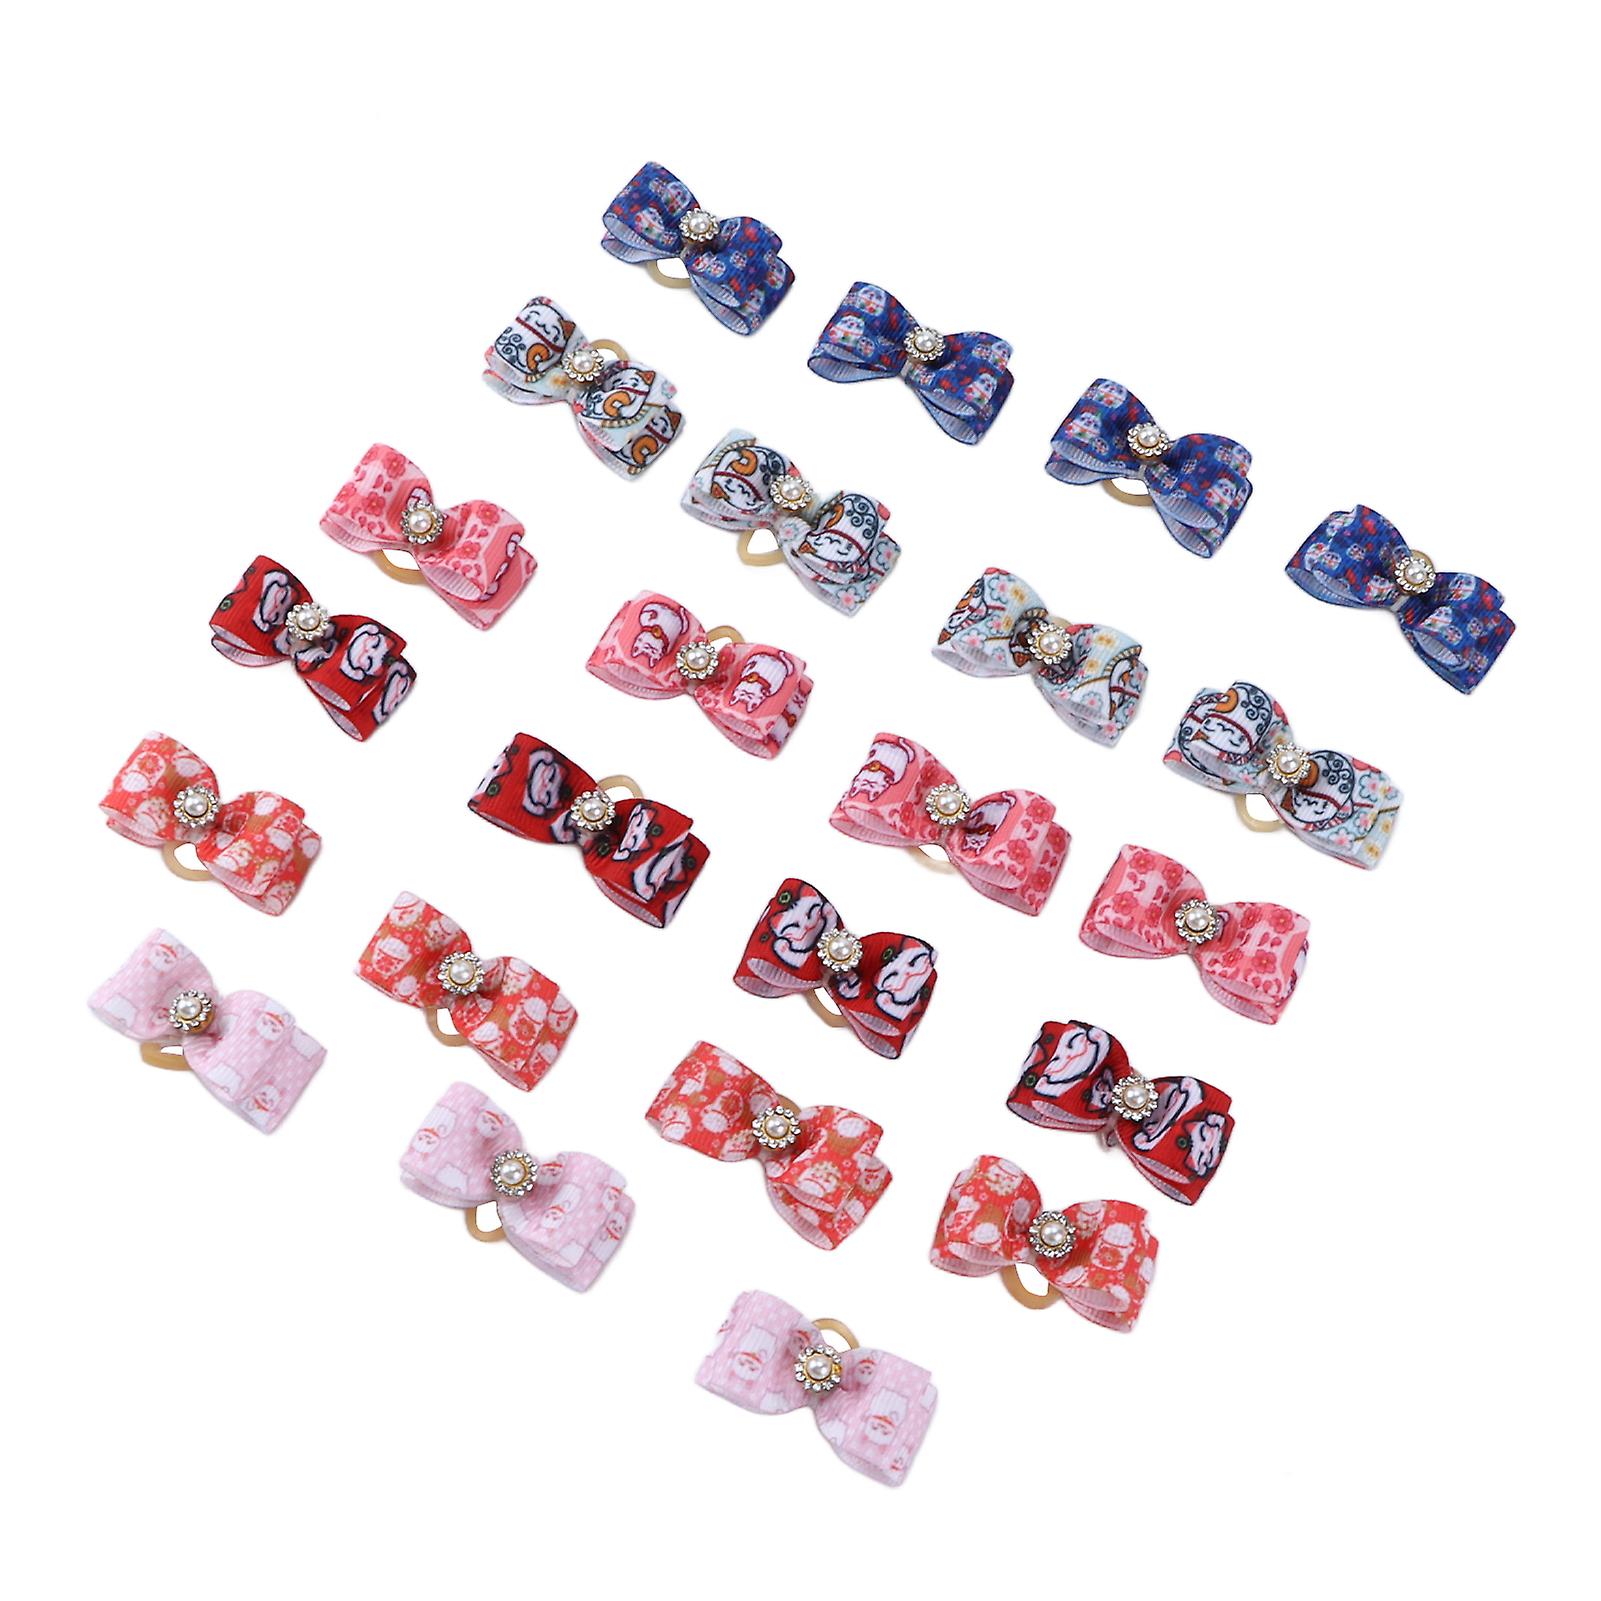 Pets Bowknot Lucky Cat Series Pets Bowknot Rubber Band Dog Accessories Pet Supplies